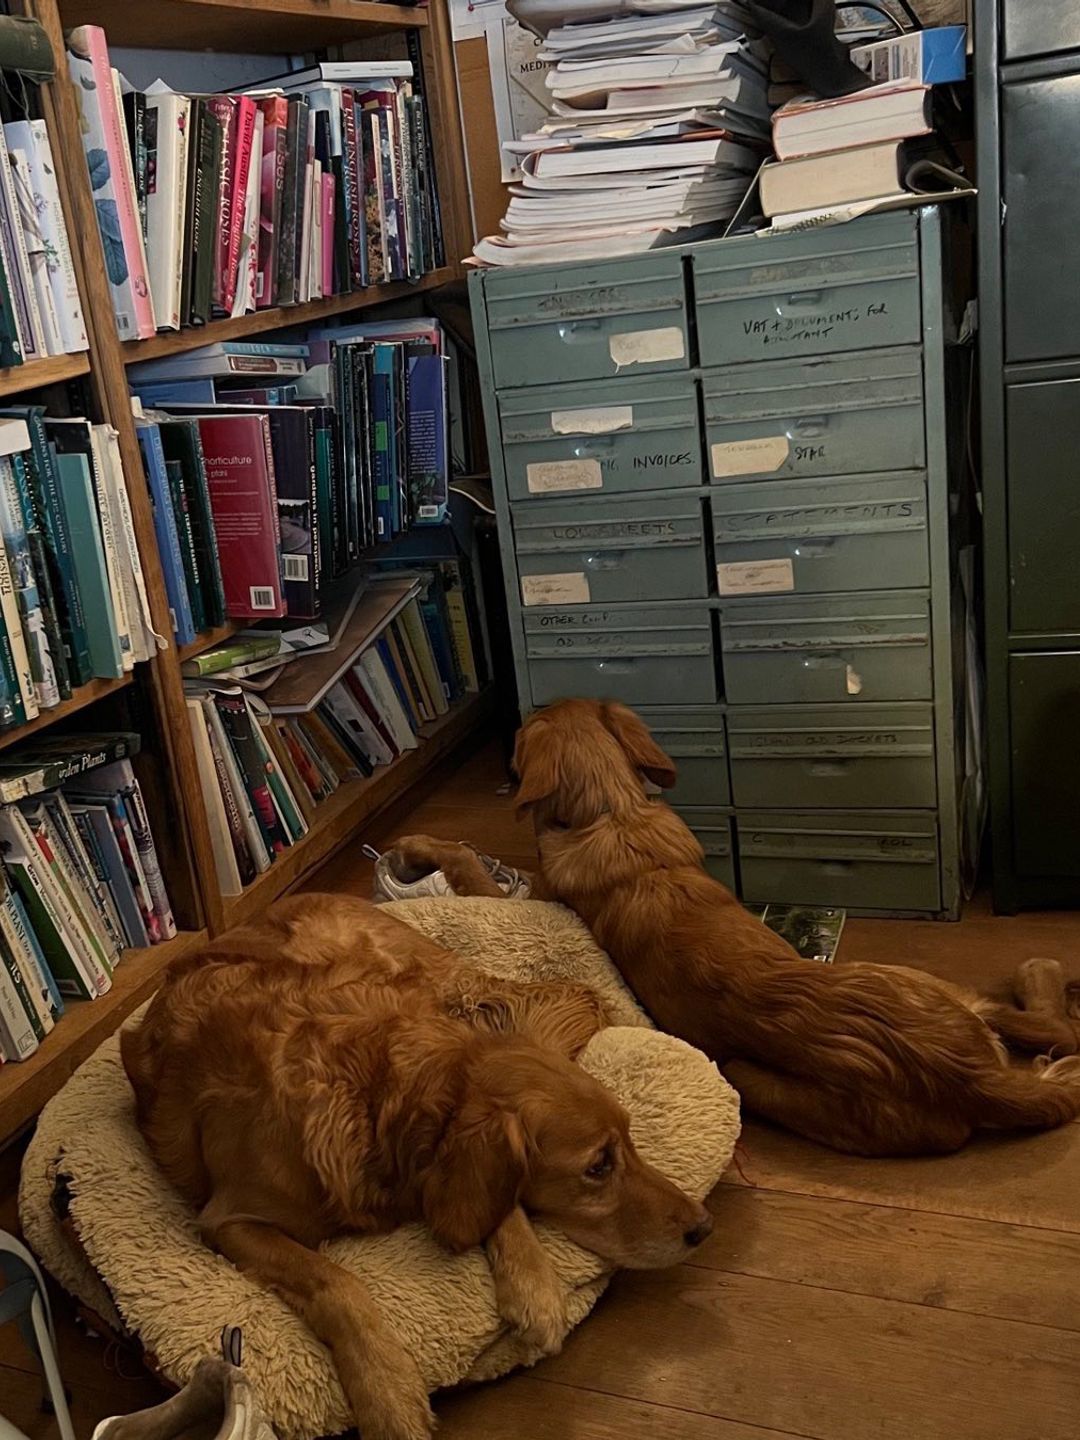 Monty Don's library and work space